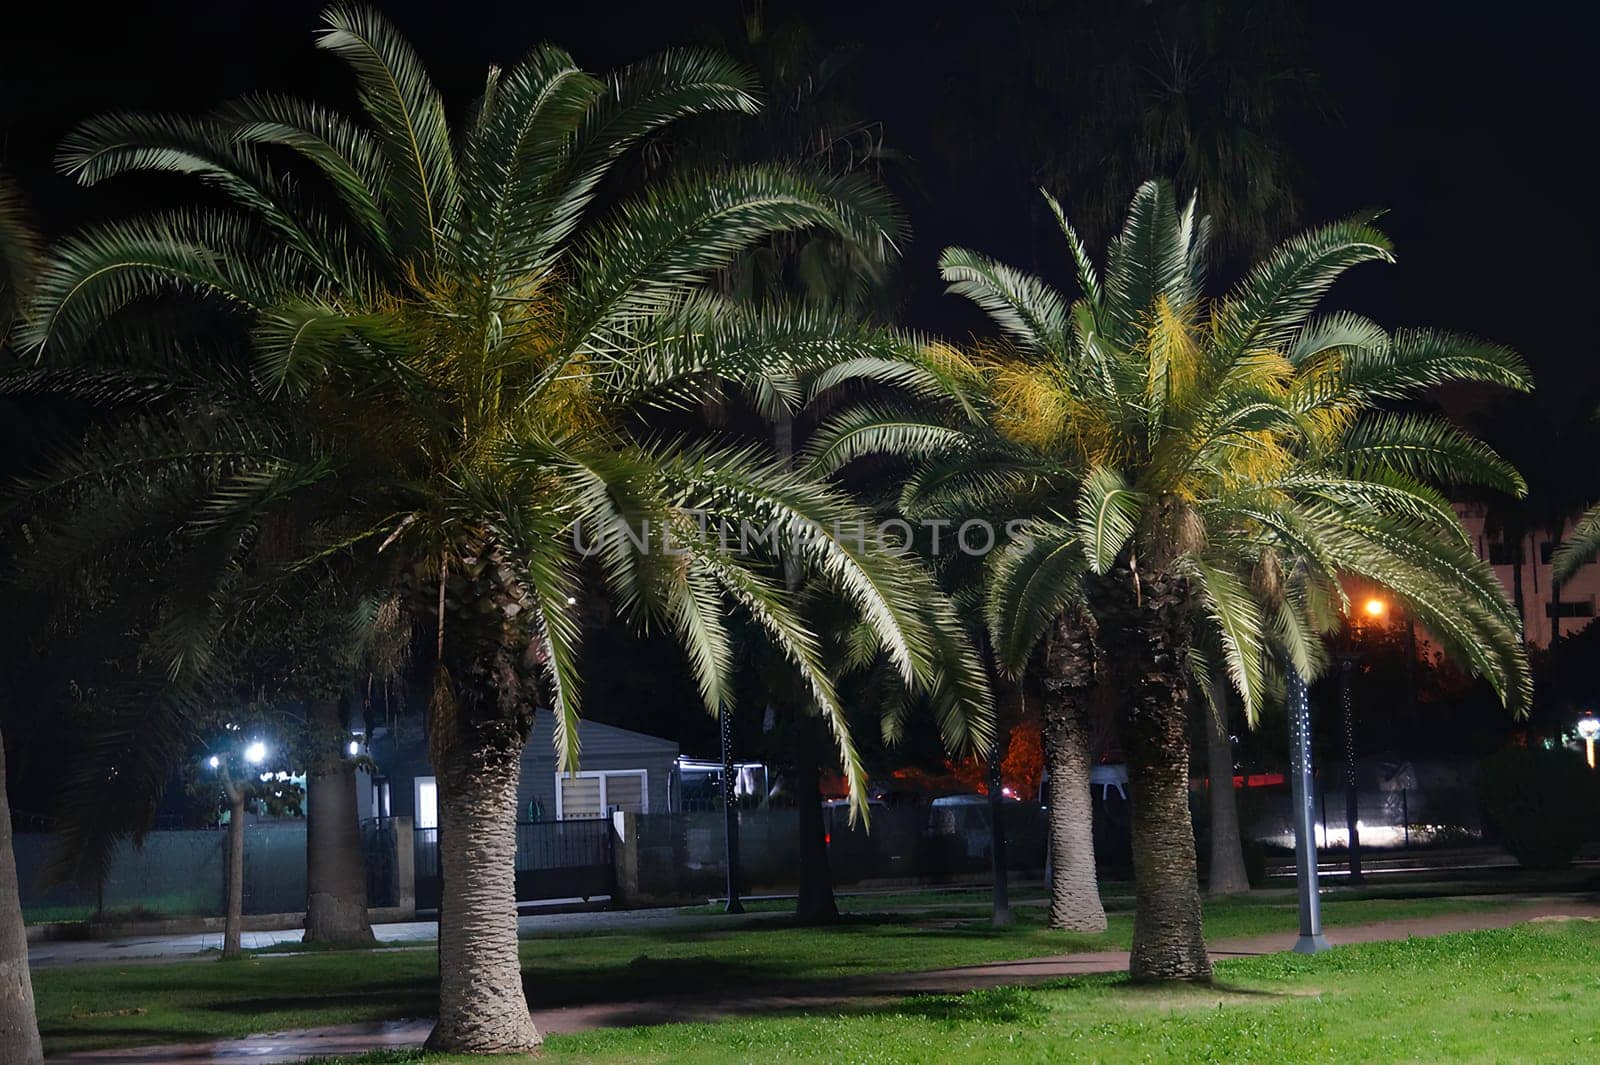 Two palm trees are standing in a park at night